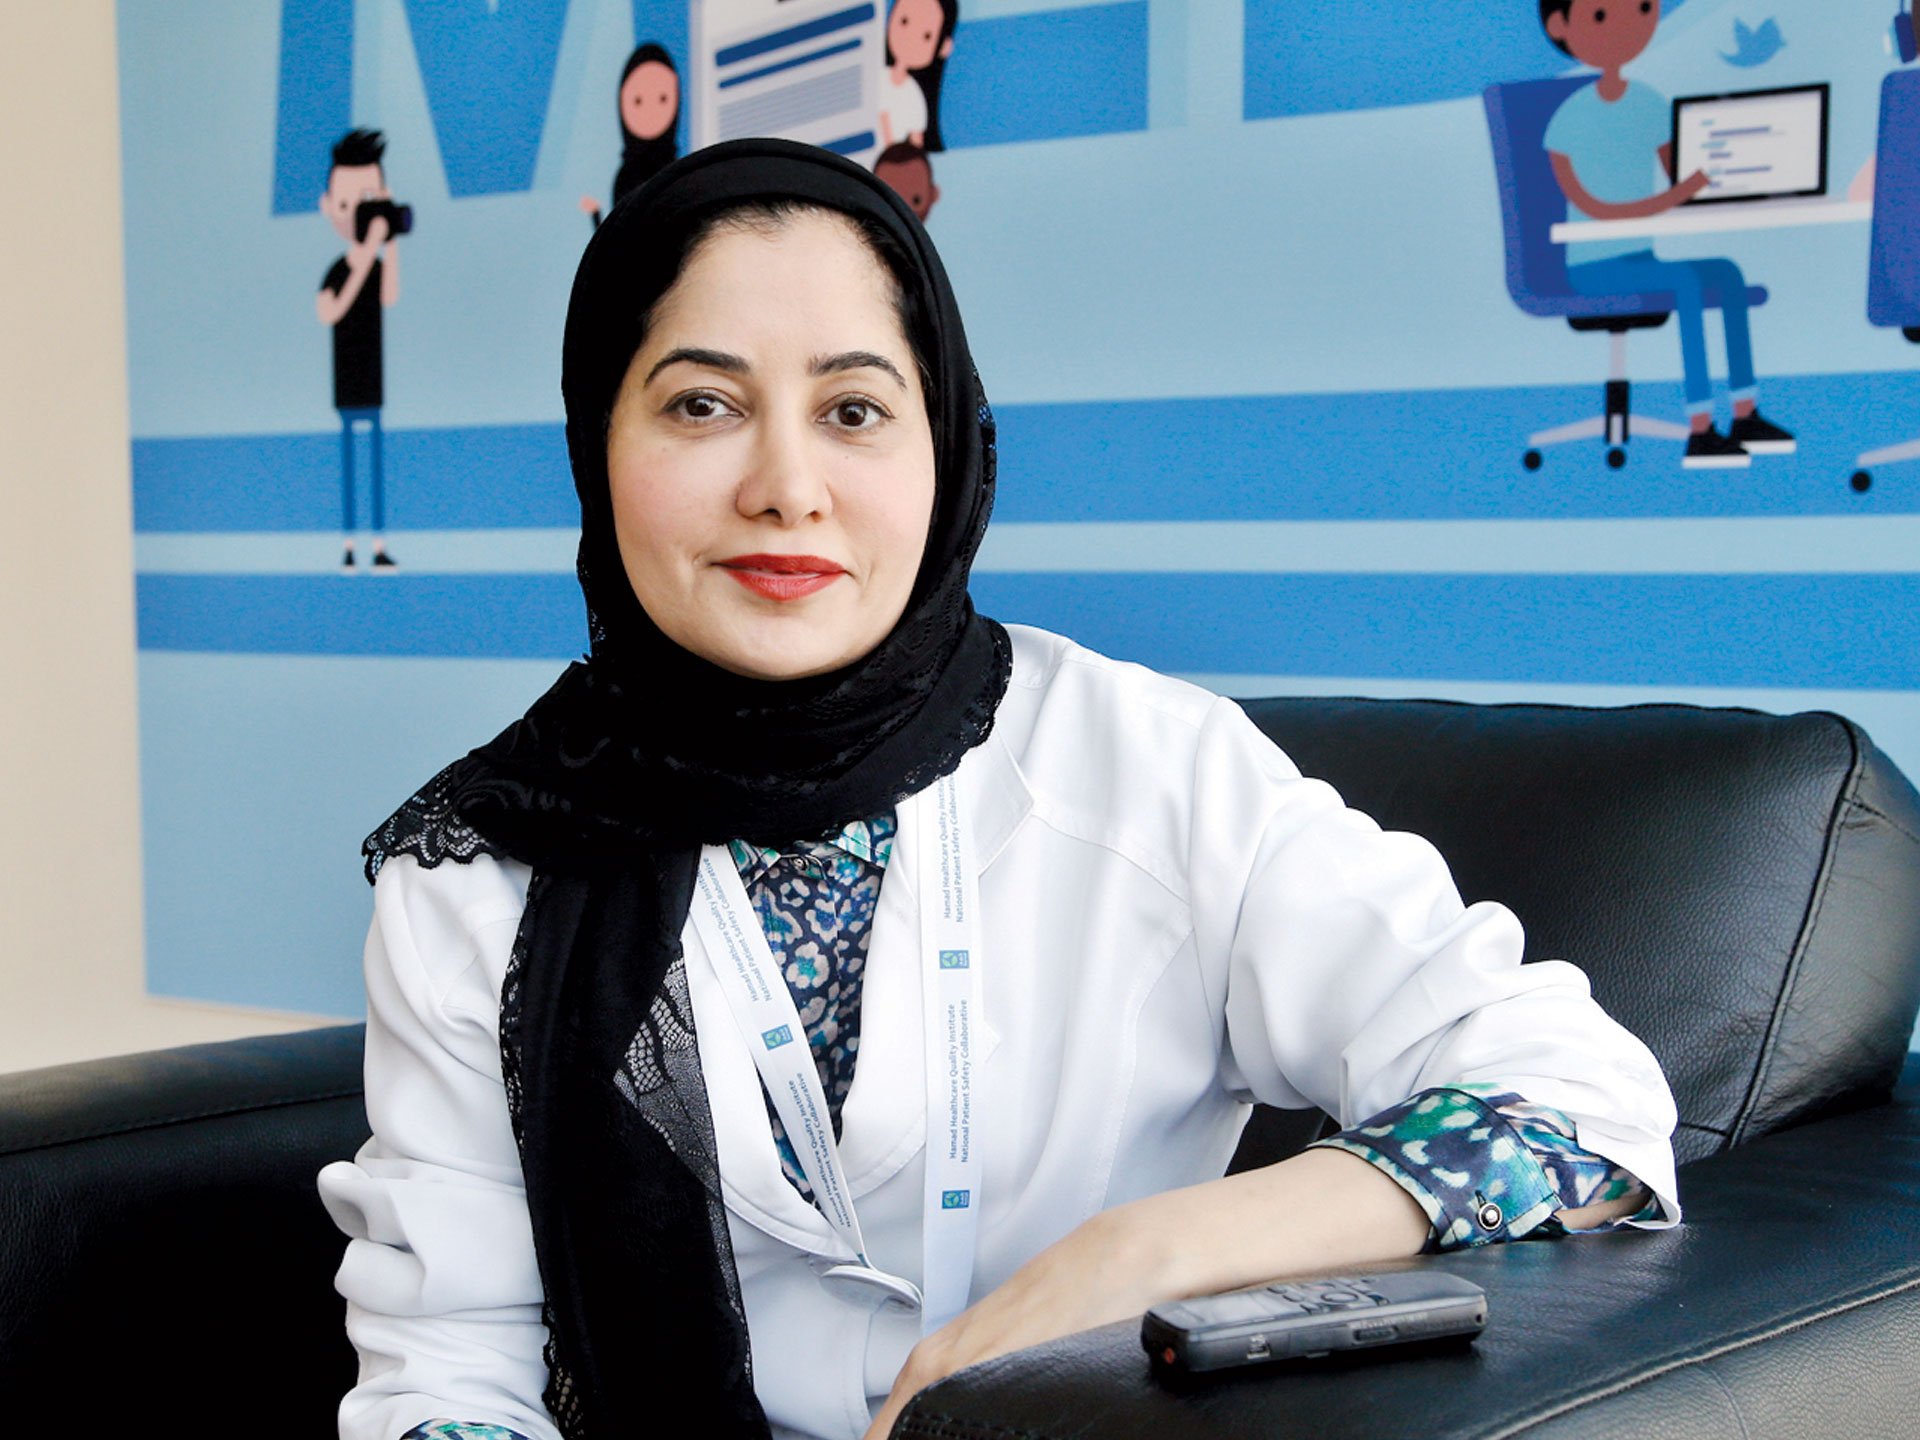 The vaccine is the only way to protect our students from Covid: Dr. Jamila Ajami